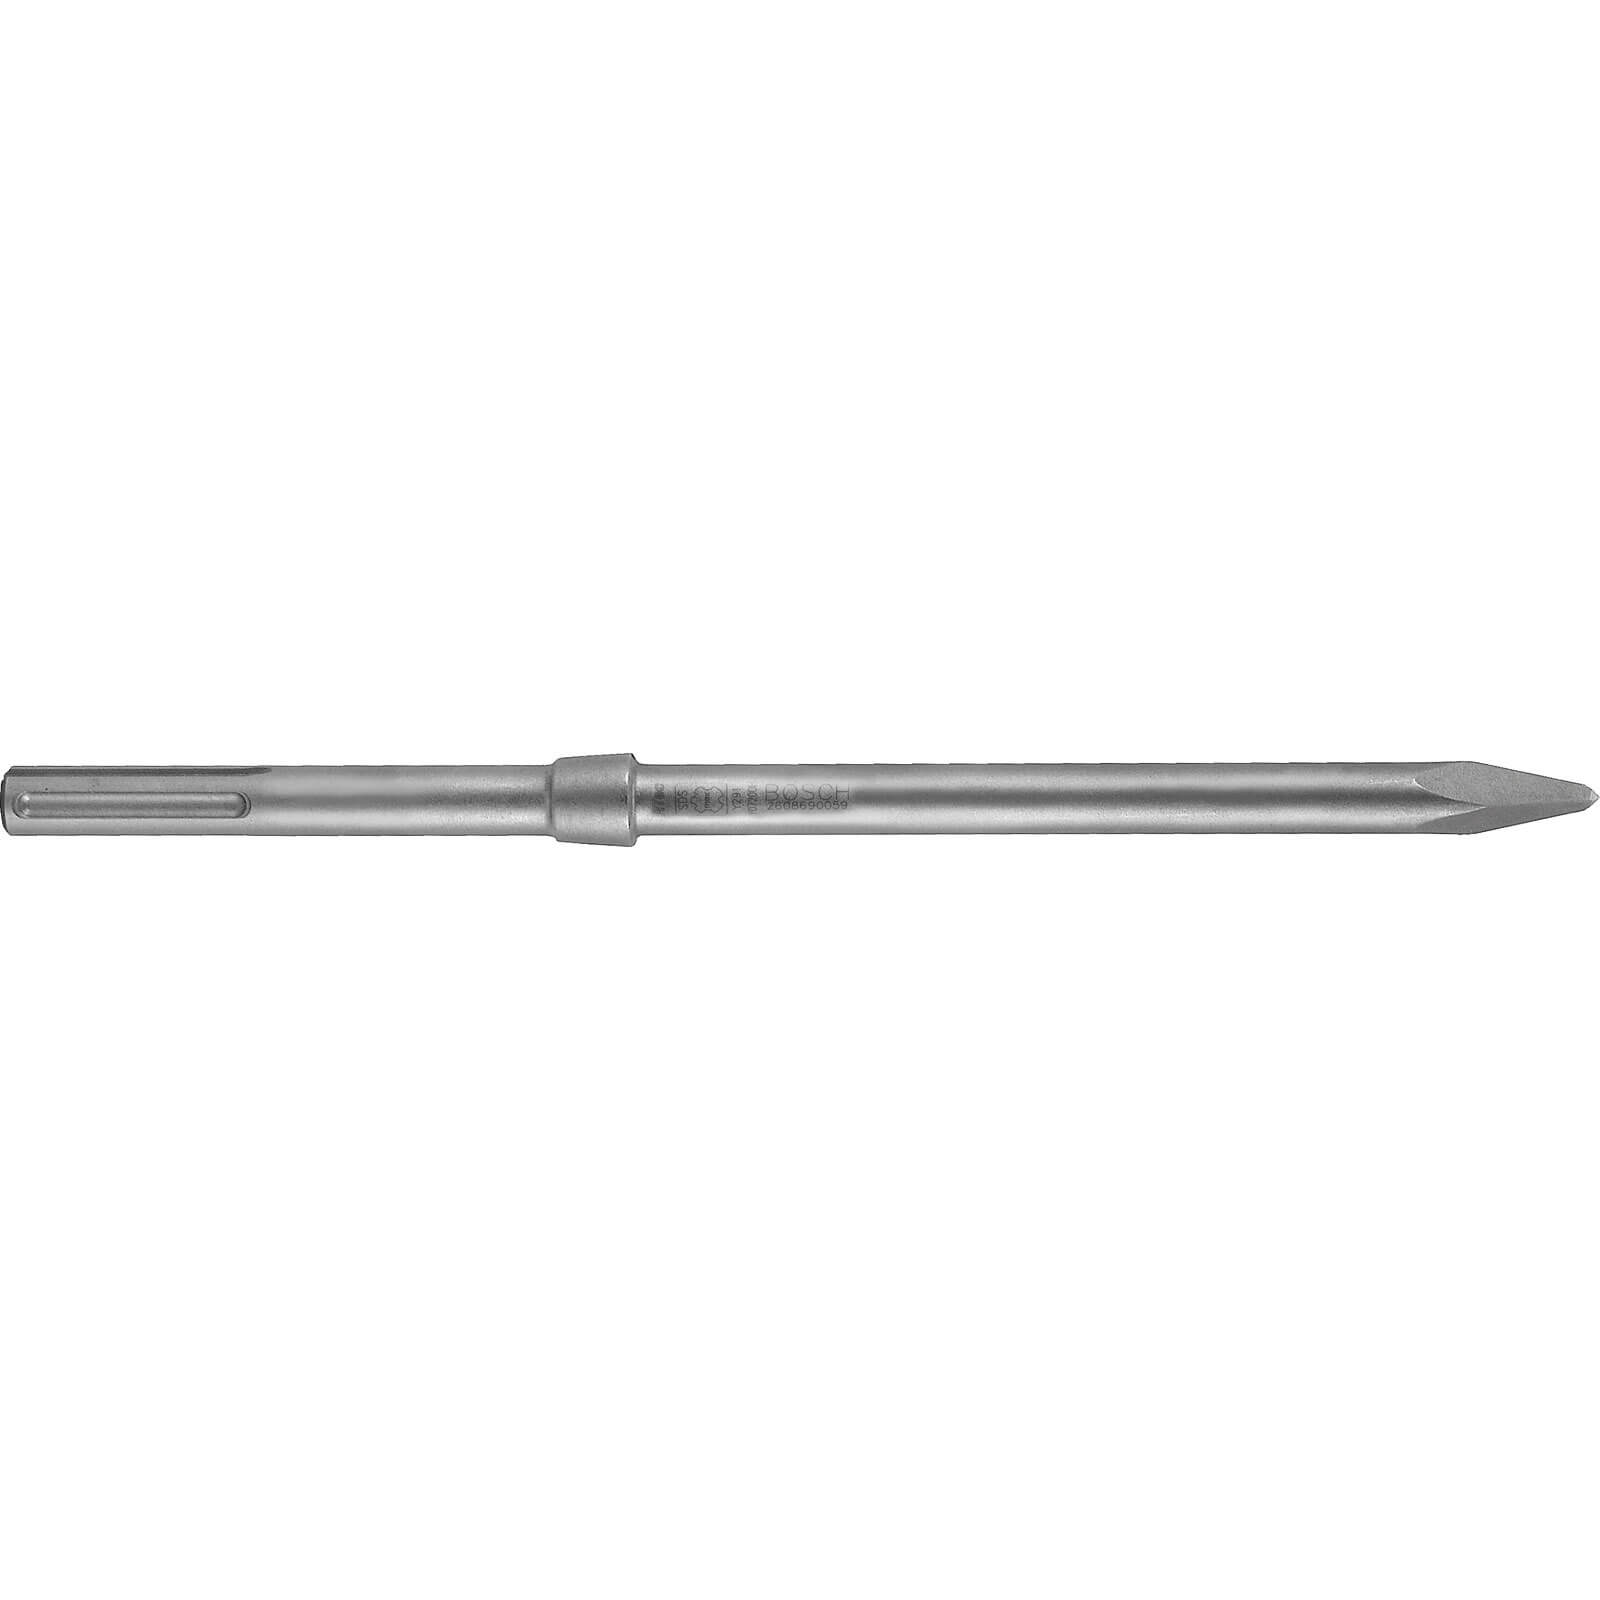 Photo of Bosch Sds Max Breaker Pointed Chisel 300mm